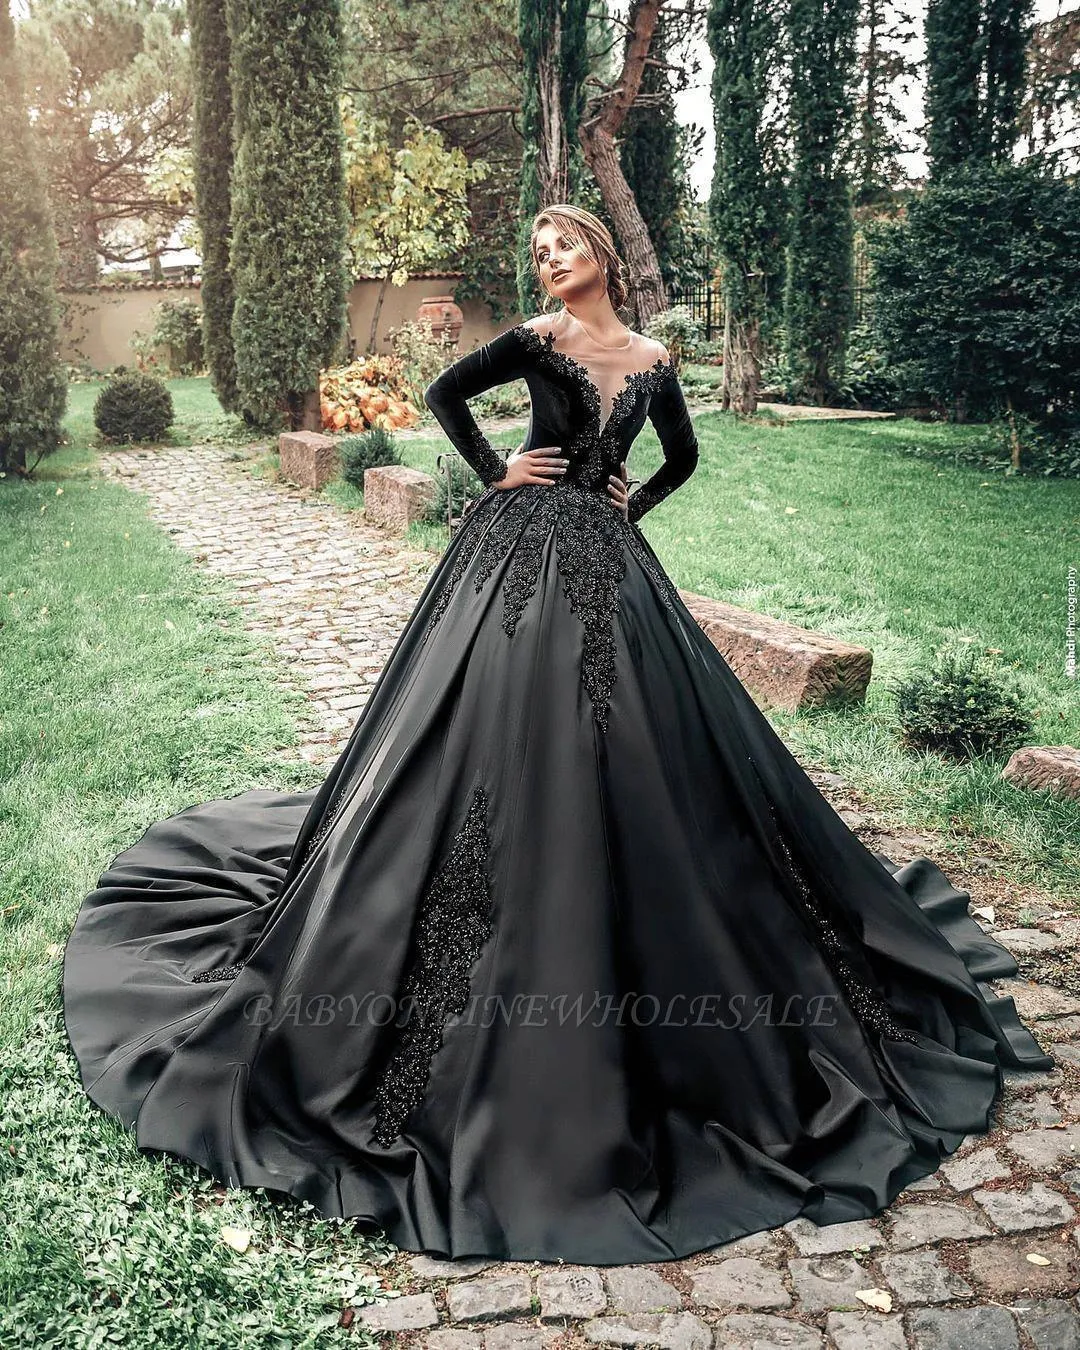 Black Fit and Flare Formal Dress with Detachable Train EN4803